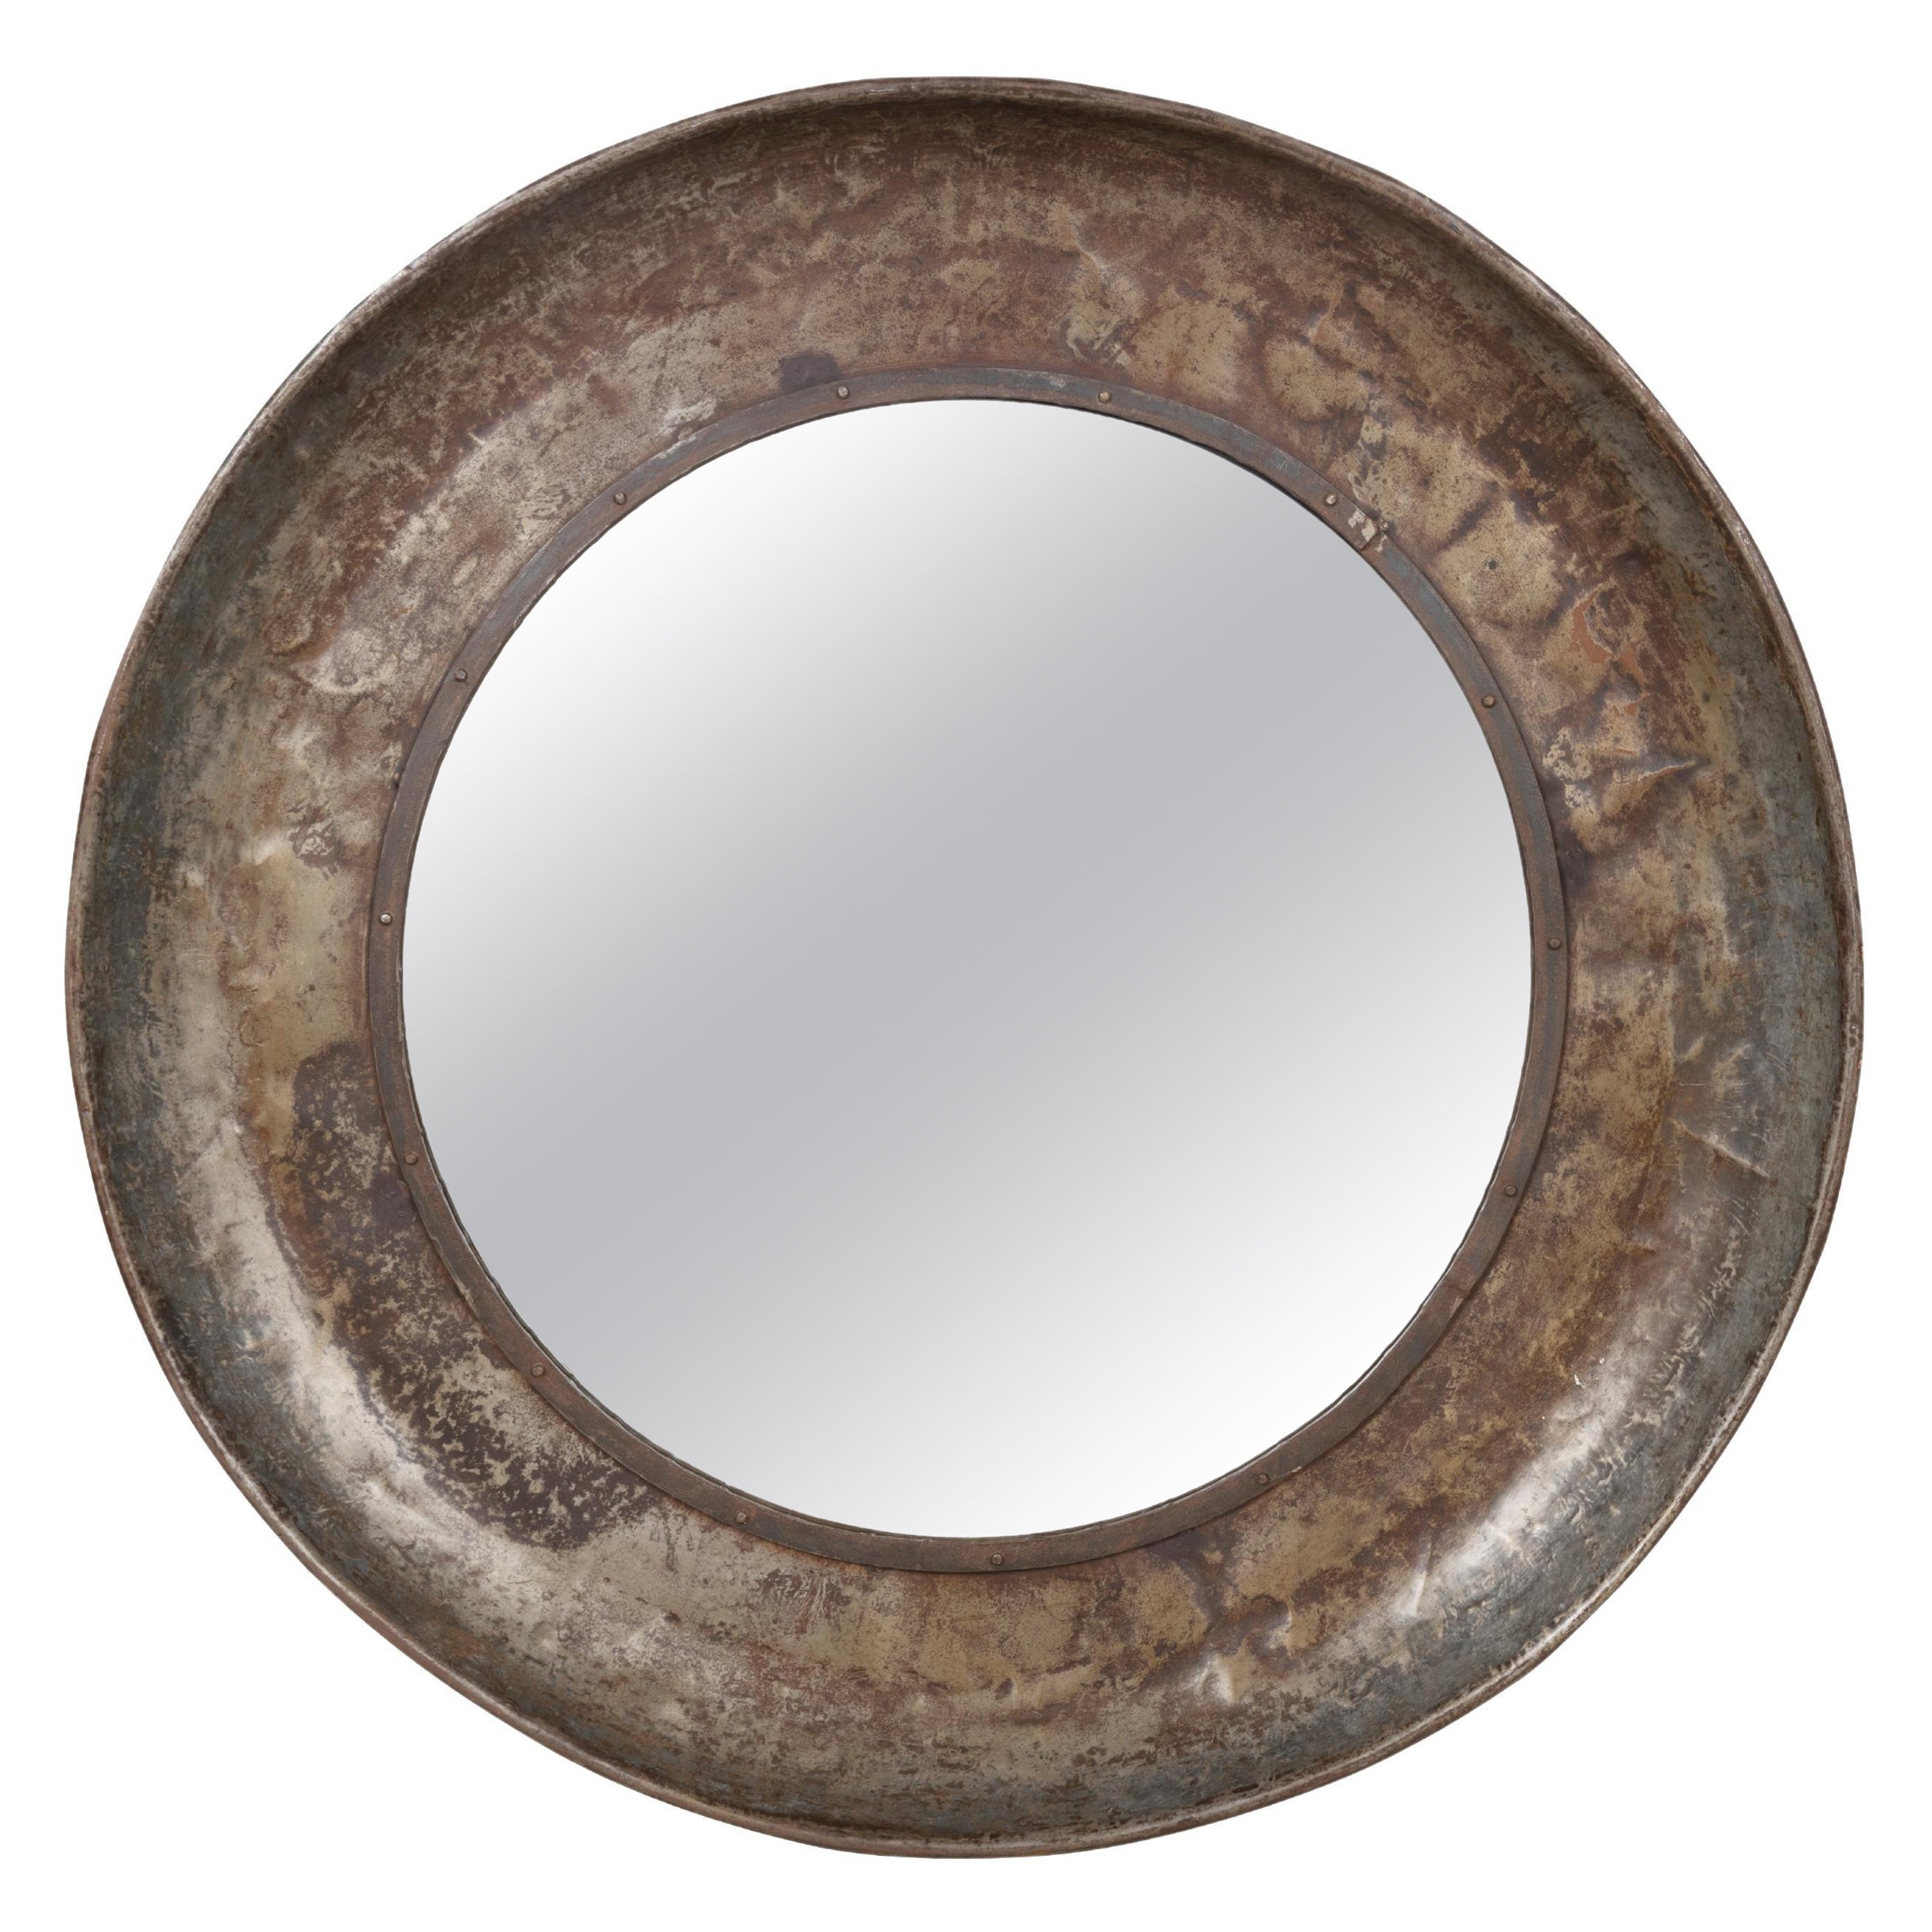 Round Mirror with Metal Border